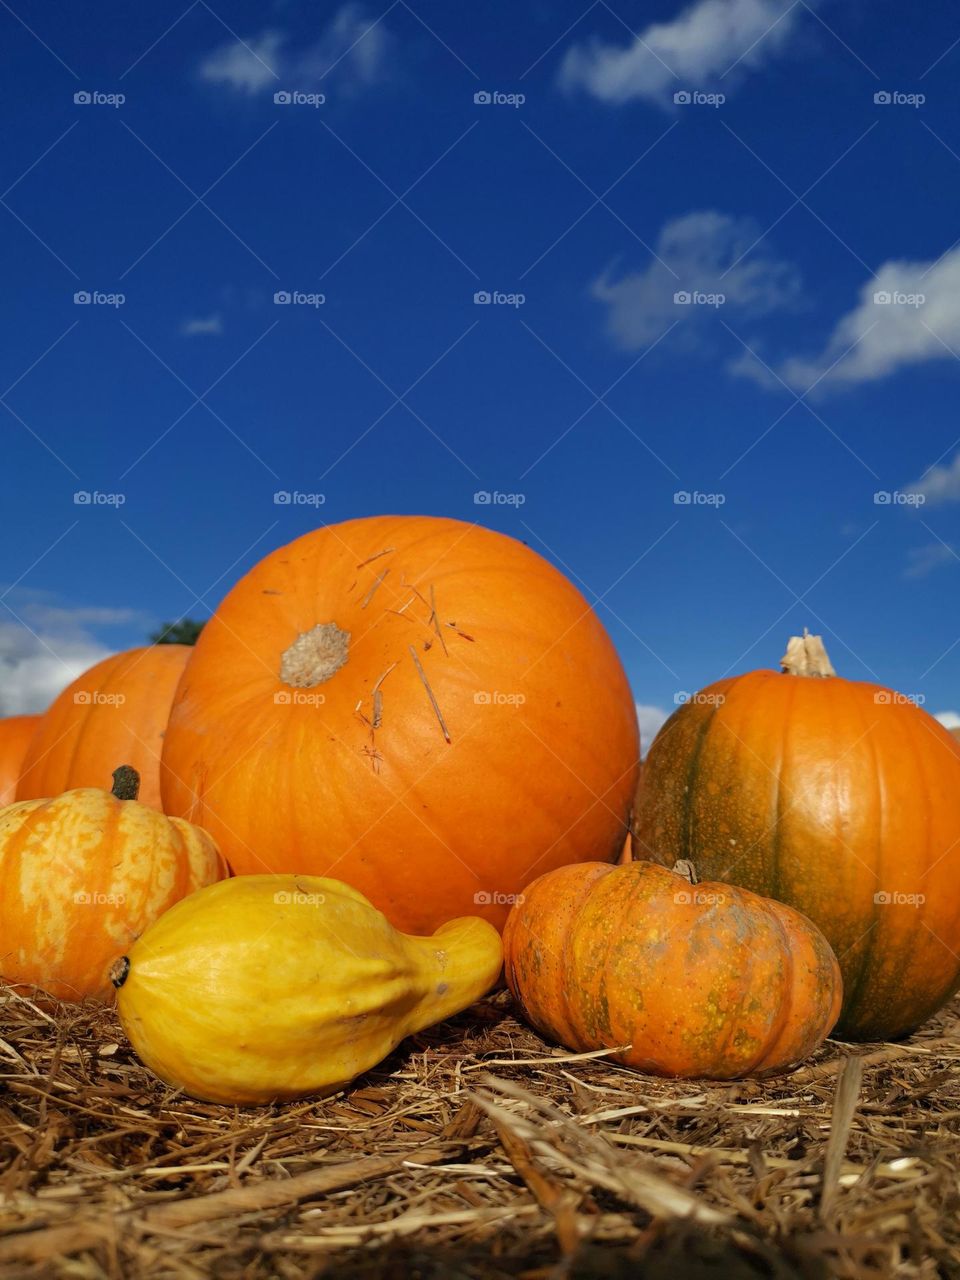 Fall colors. Autumn time. Halloween time. Pumpkins. Orange and yellow colours. Sunny autumn day. Autumn colors.